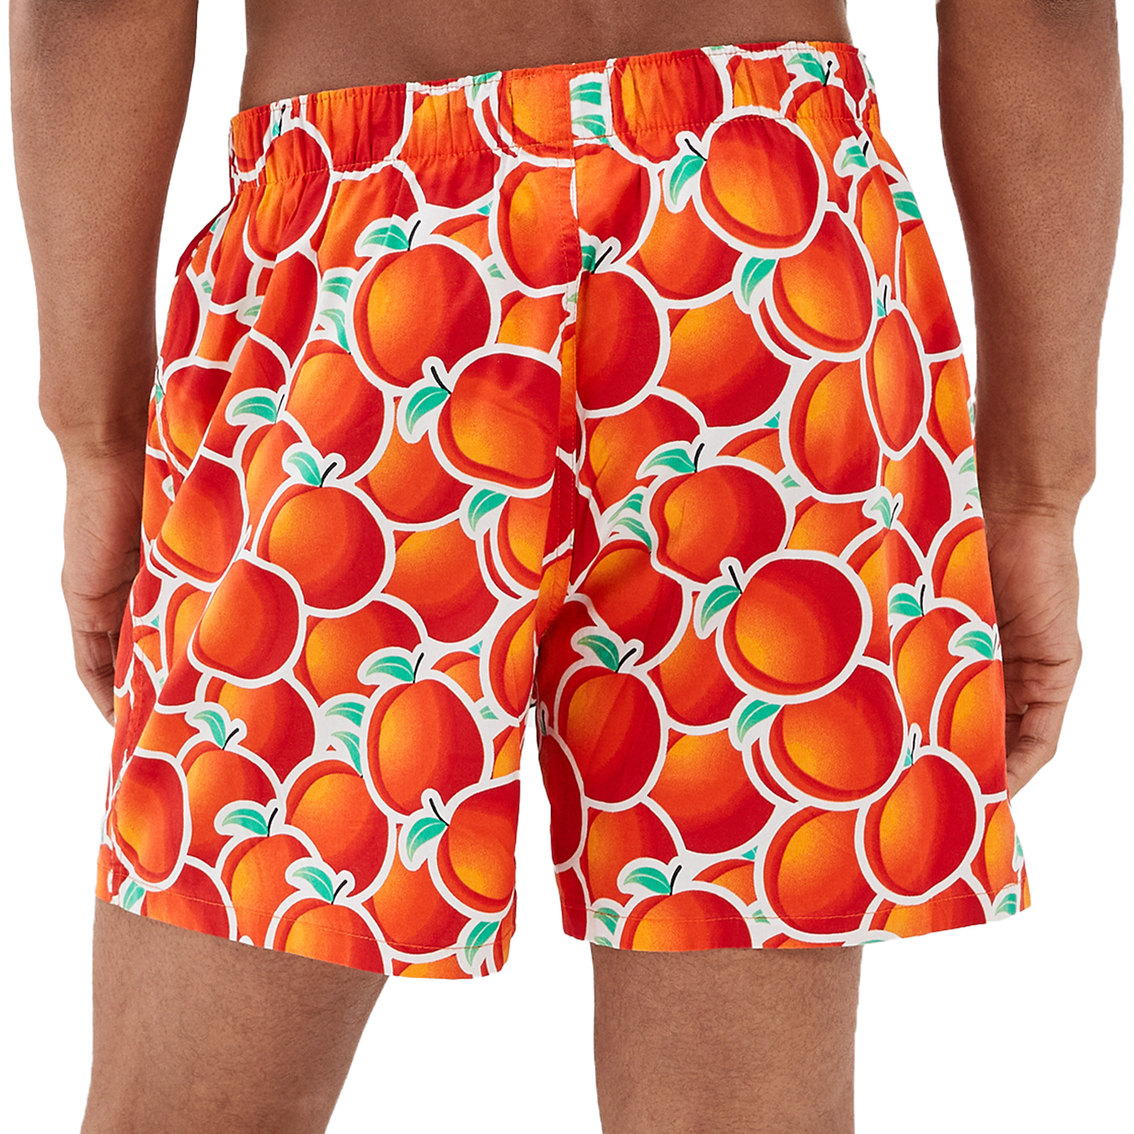 American Eagle Aeo Peaches Stretch Boxer Shorts | Underwear | Clothing ...